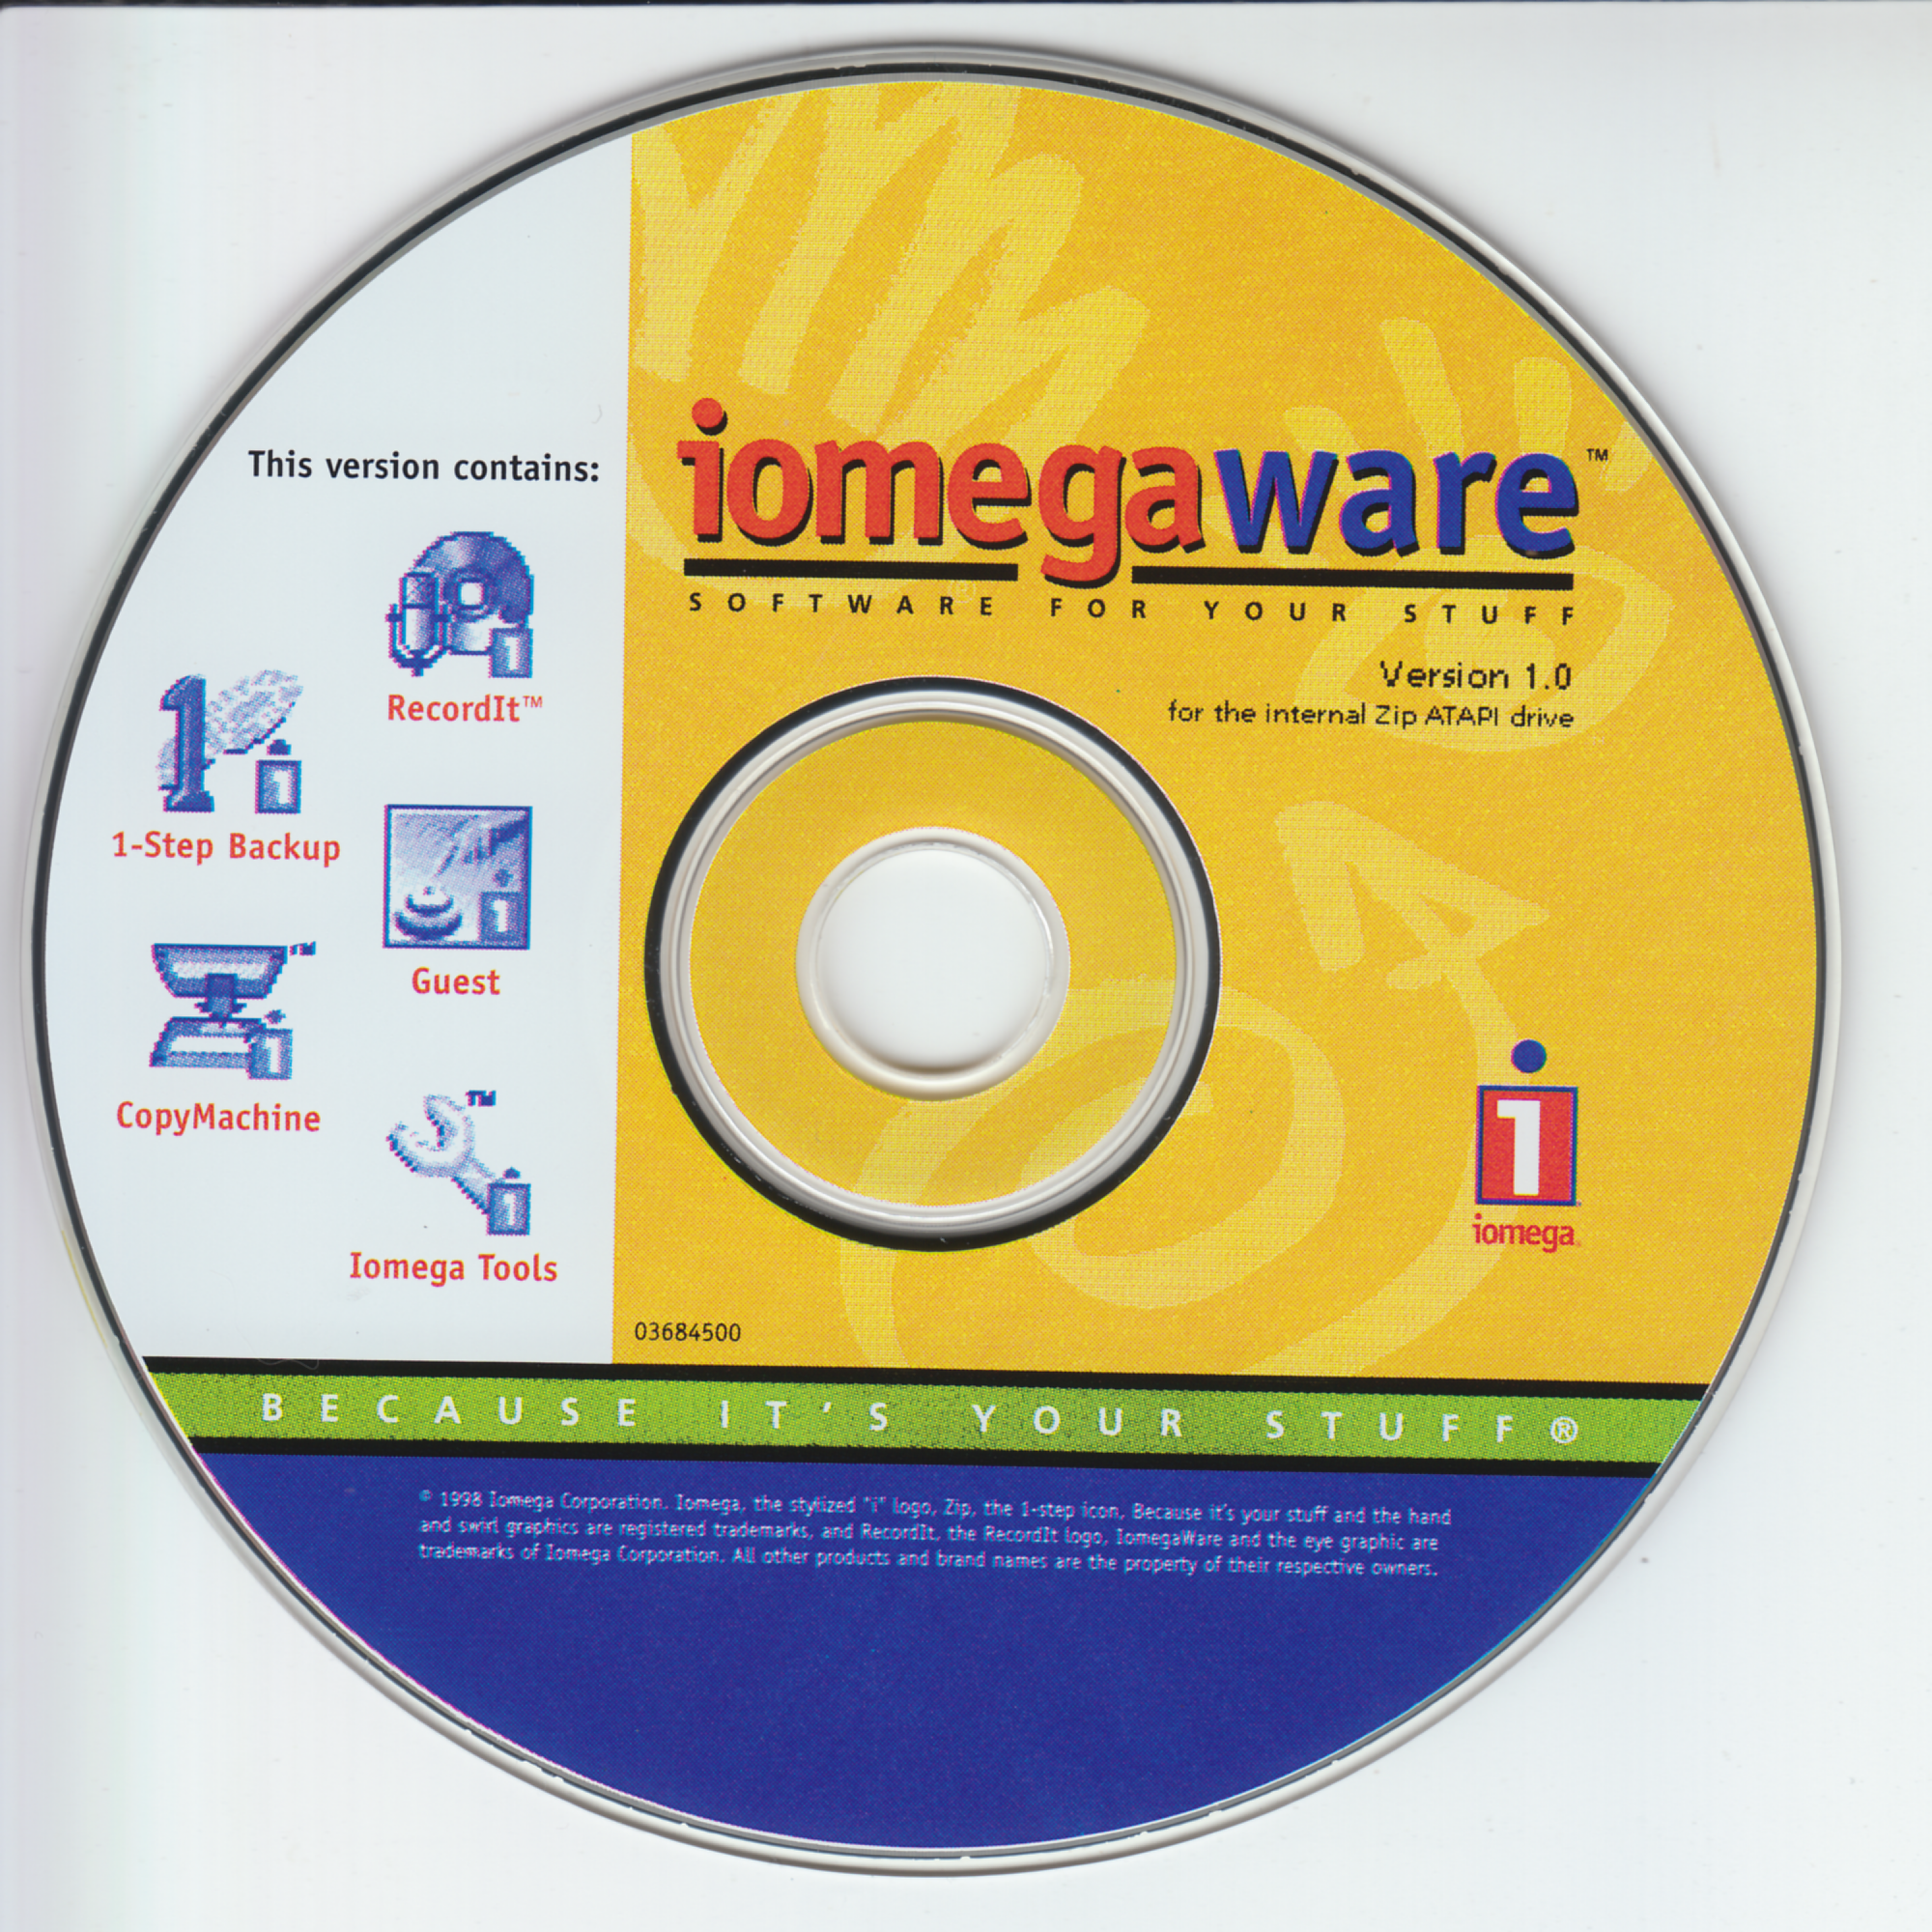 Iomega software download inspired how to create tech products customers love pdf download